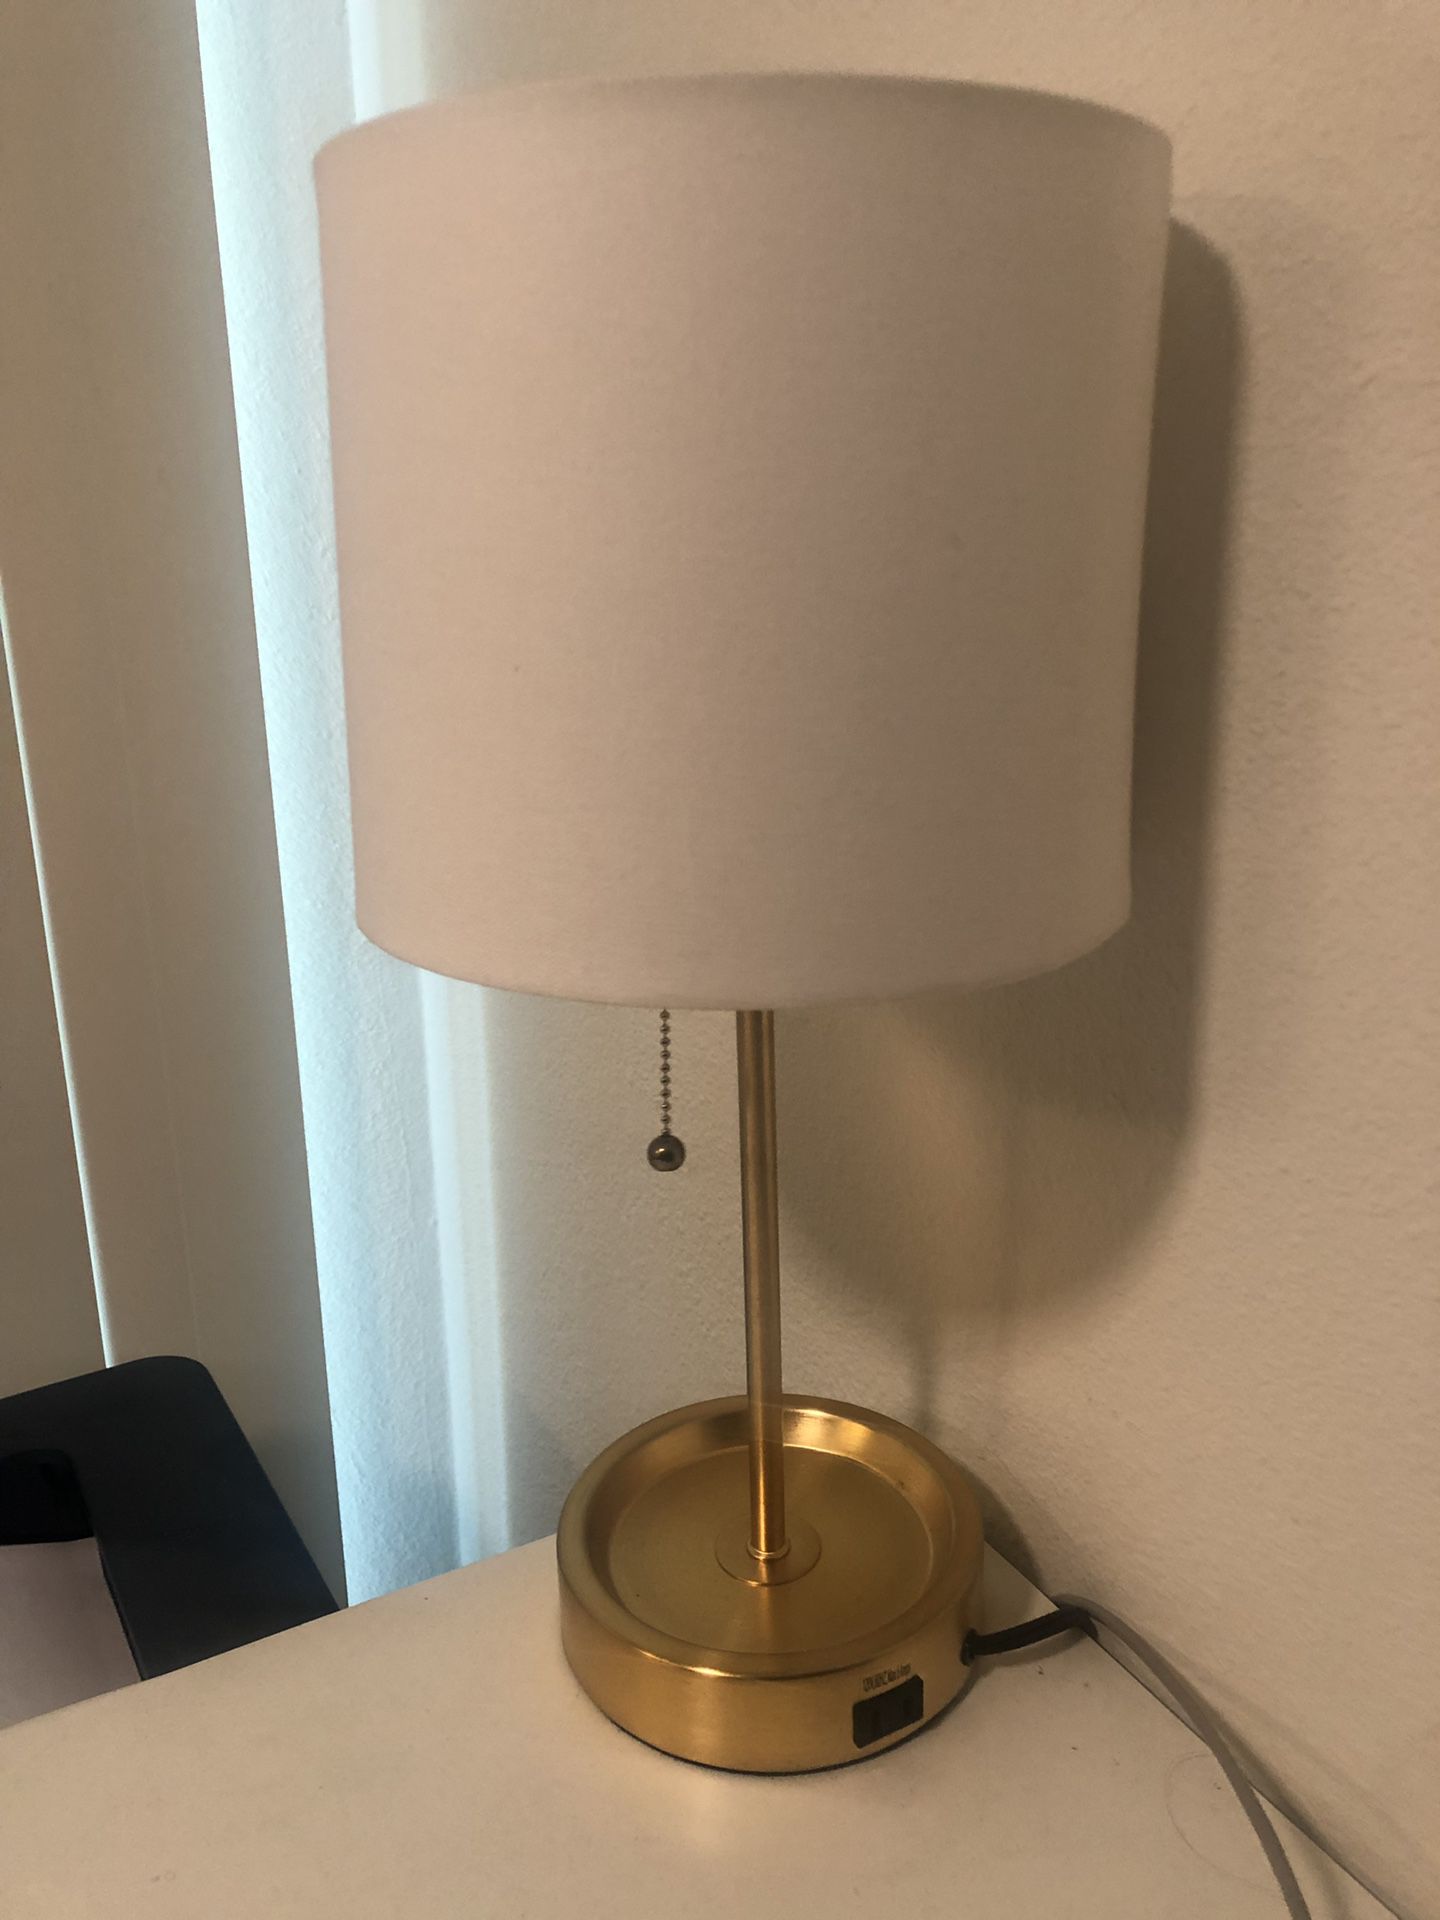 Target gold lamp with built-in charging outlet